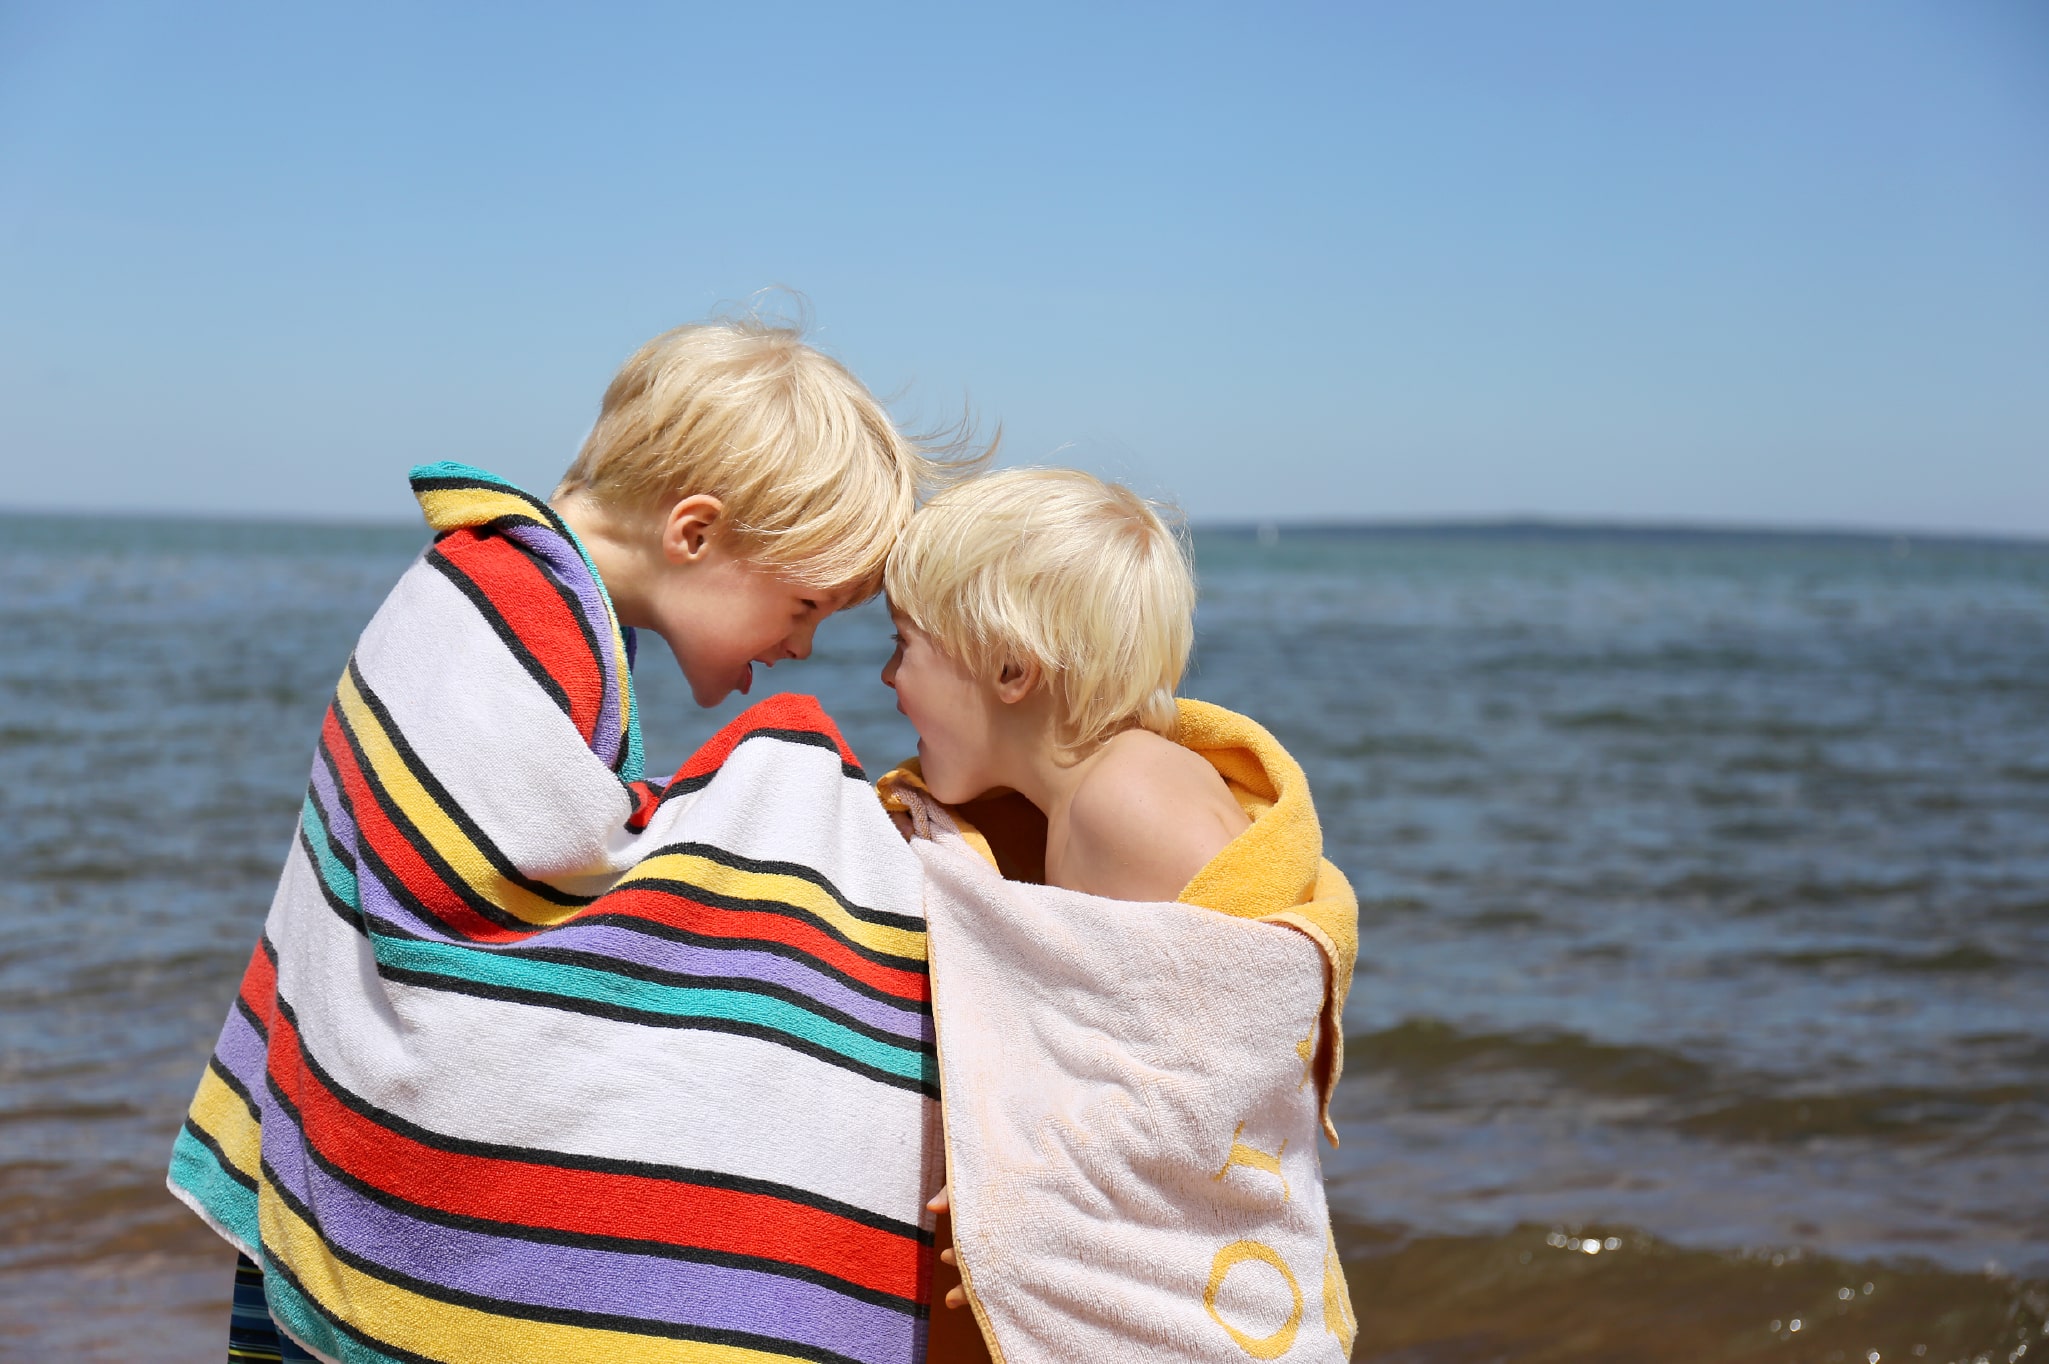 Two blonde boys playing in beach towels near the sea